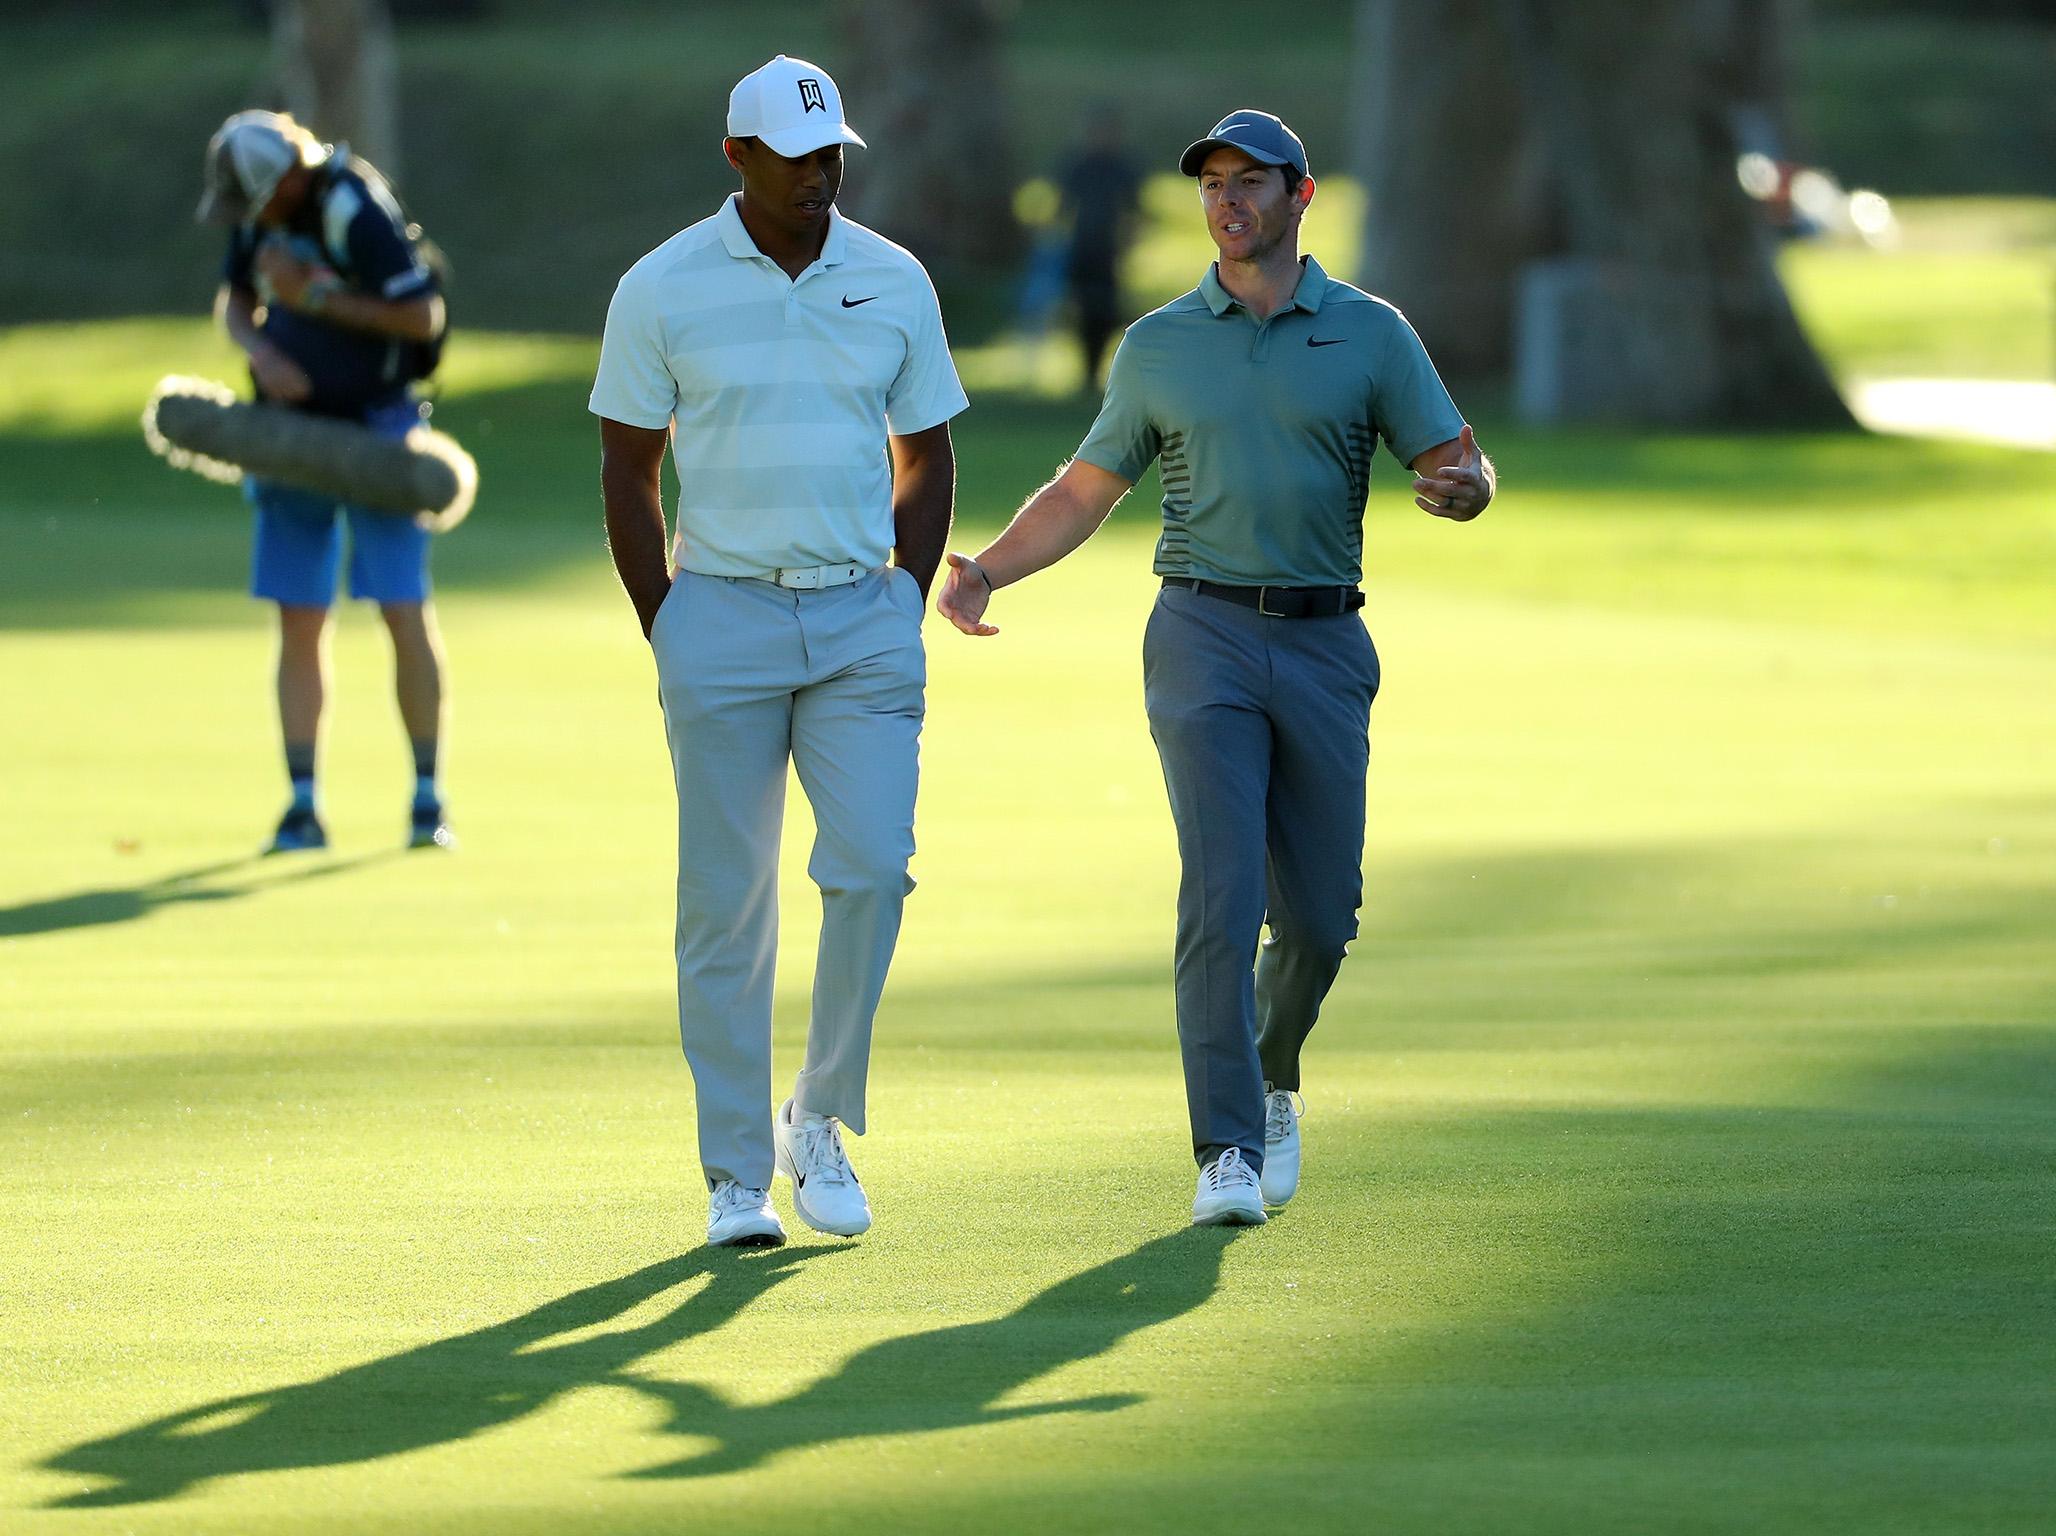 Tiger Woods and Rory McIlroy have given golf a welcome boost